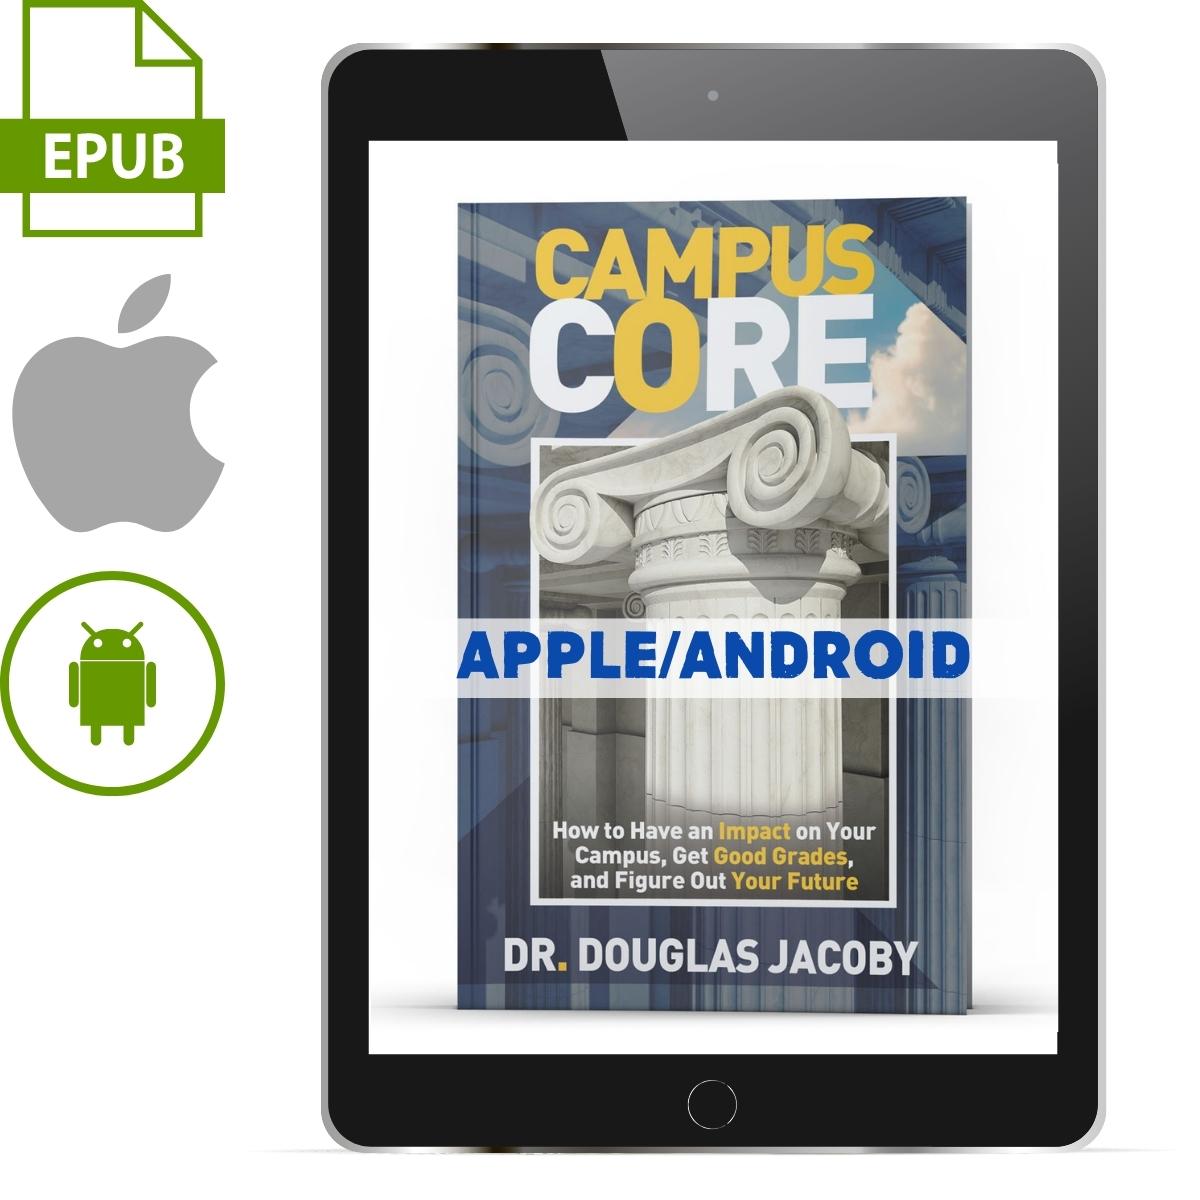 Campus Core: How to Have an Impact on Your Campus (Apple/Android) - Illumination Publishers